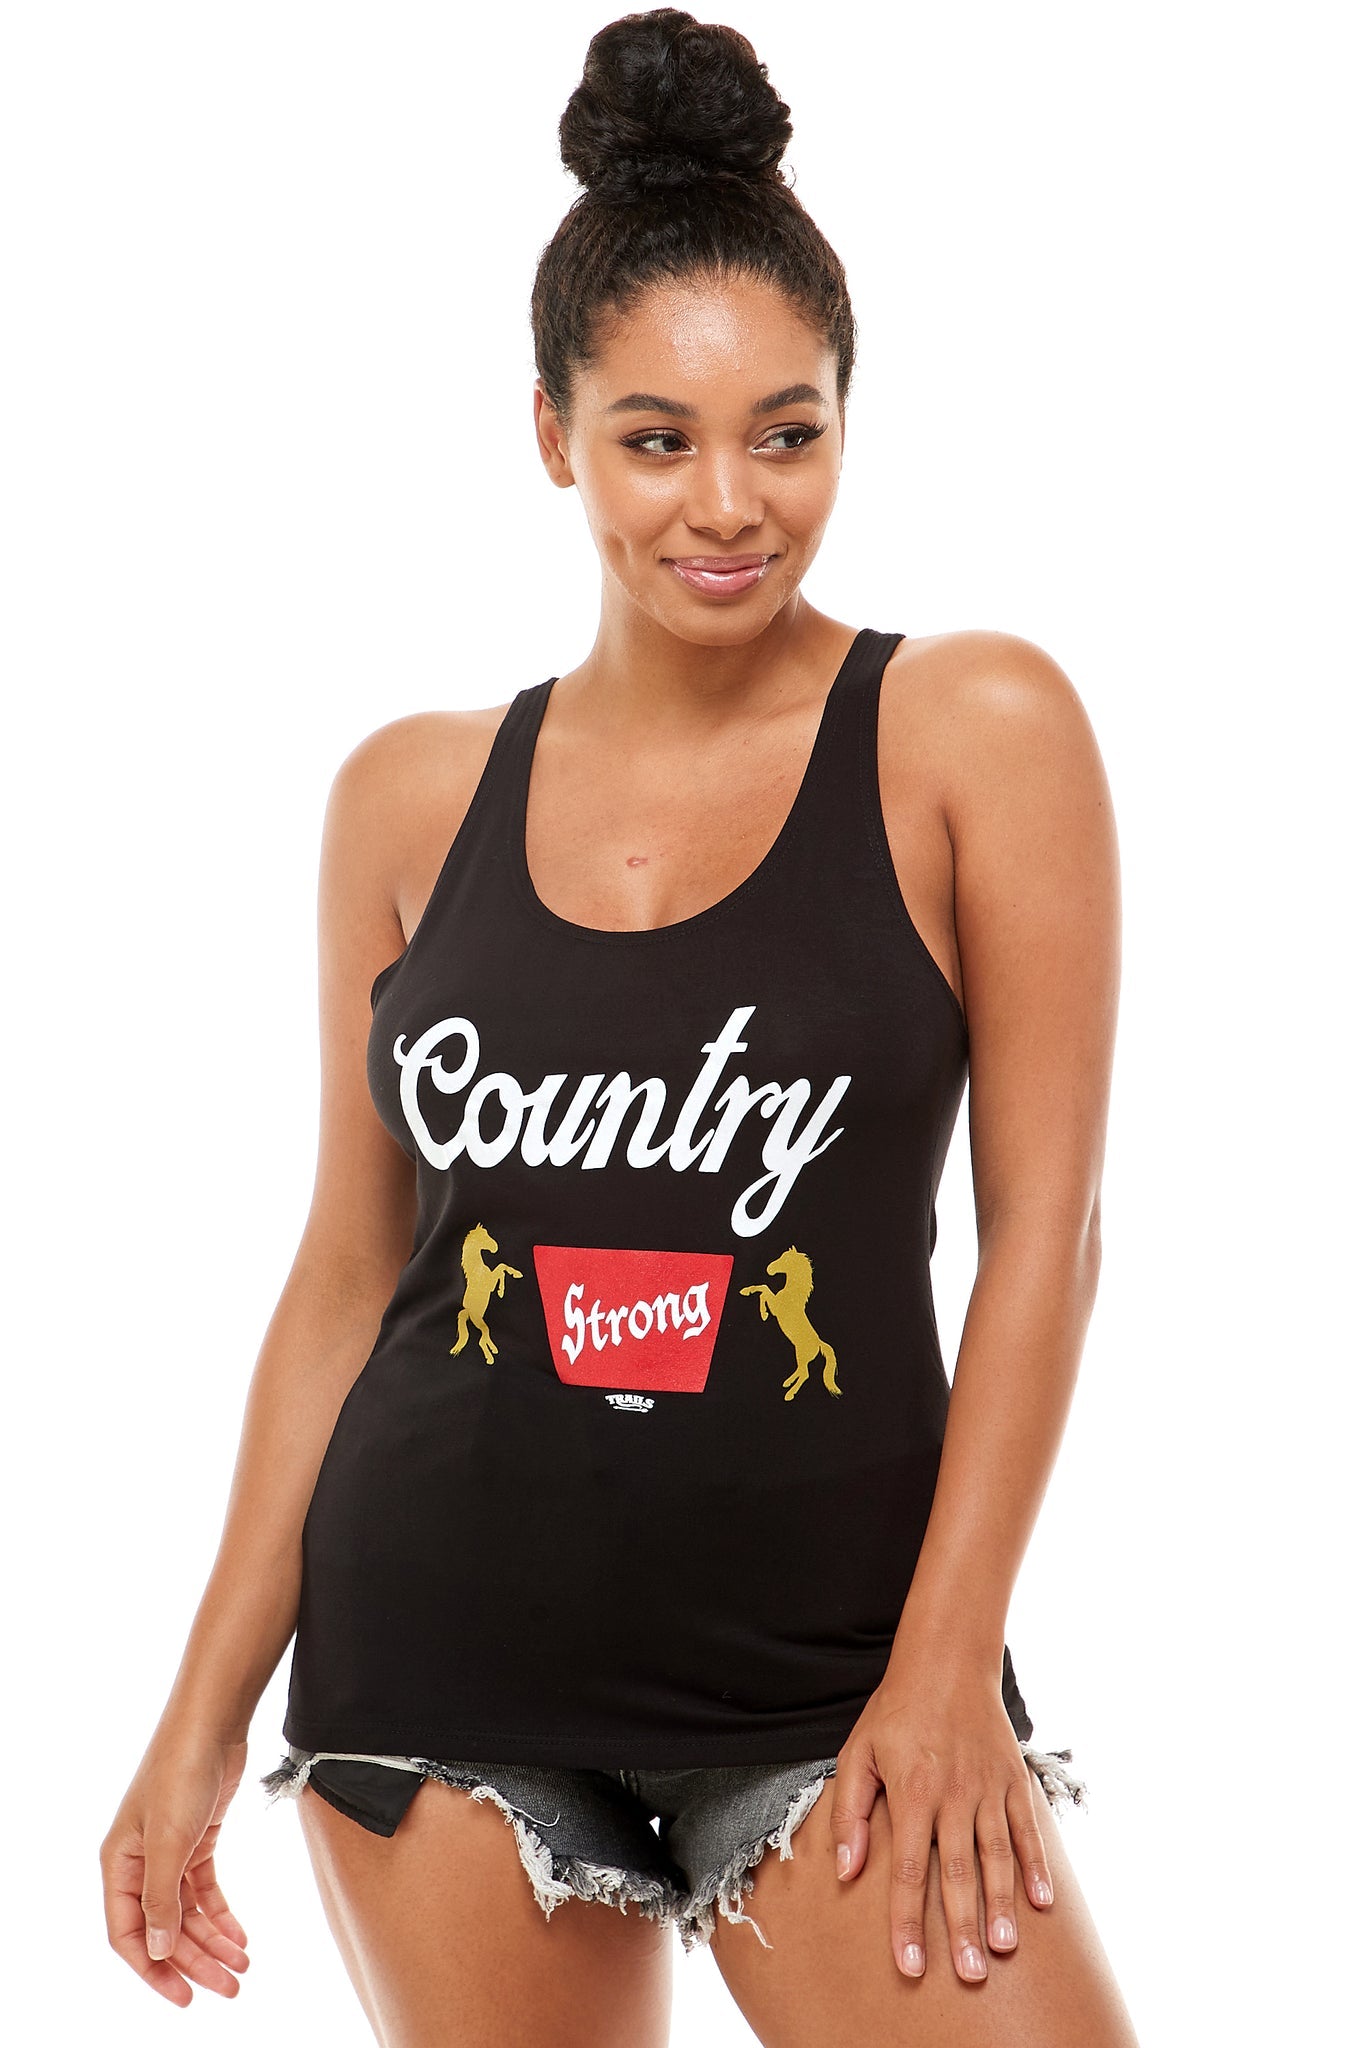 Country Strong Tank - and, ATTITUDE, COUNTRY, countrystrong, COWGIRL, GIRL, HOWDY, lips, PLUS, rocker, RODEO, SIZE, strong, SUMMER, TANK, TOP, WESTERN - Shirts & Tops - Baha Ranch Western Wear